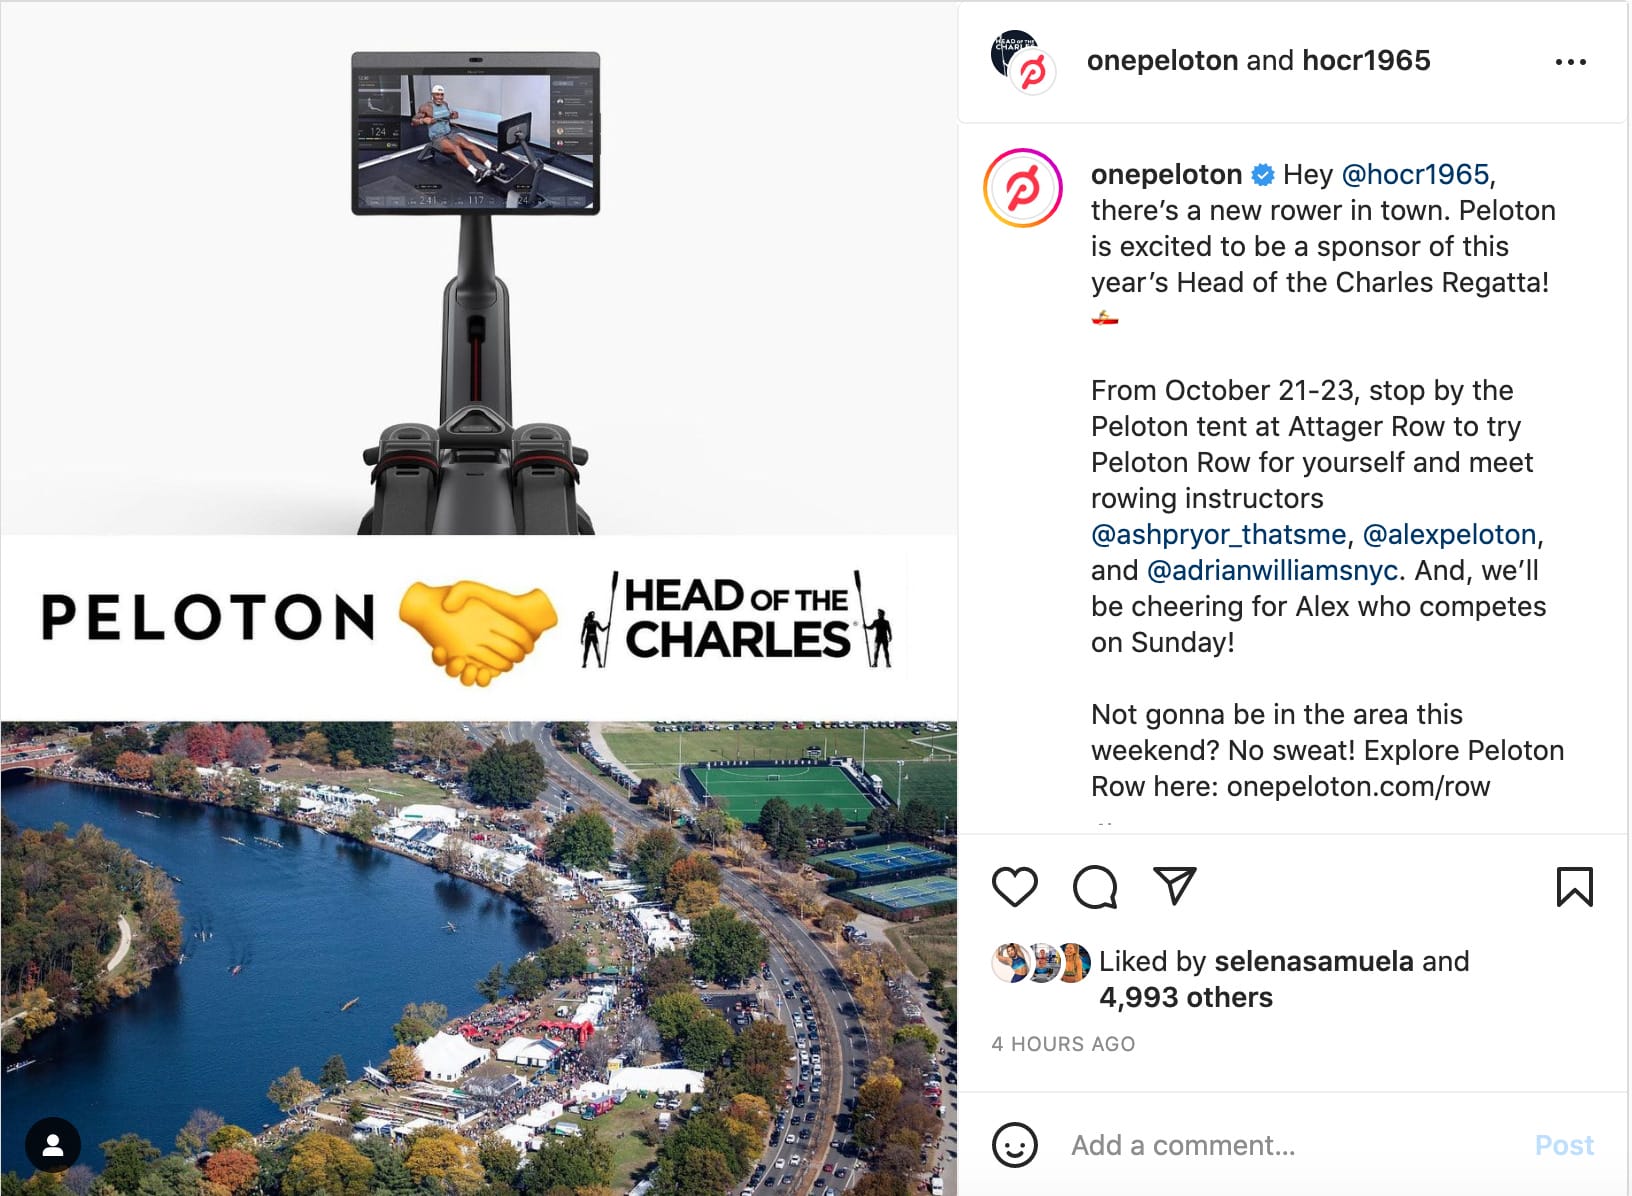 Peloton Sponsoring Major Rowing event (Head of the Charles Regatta) and Hosting Multiple Meet and Greets with Rowing Instructors